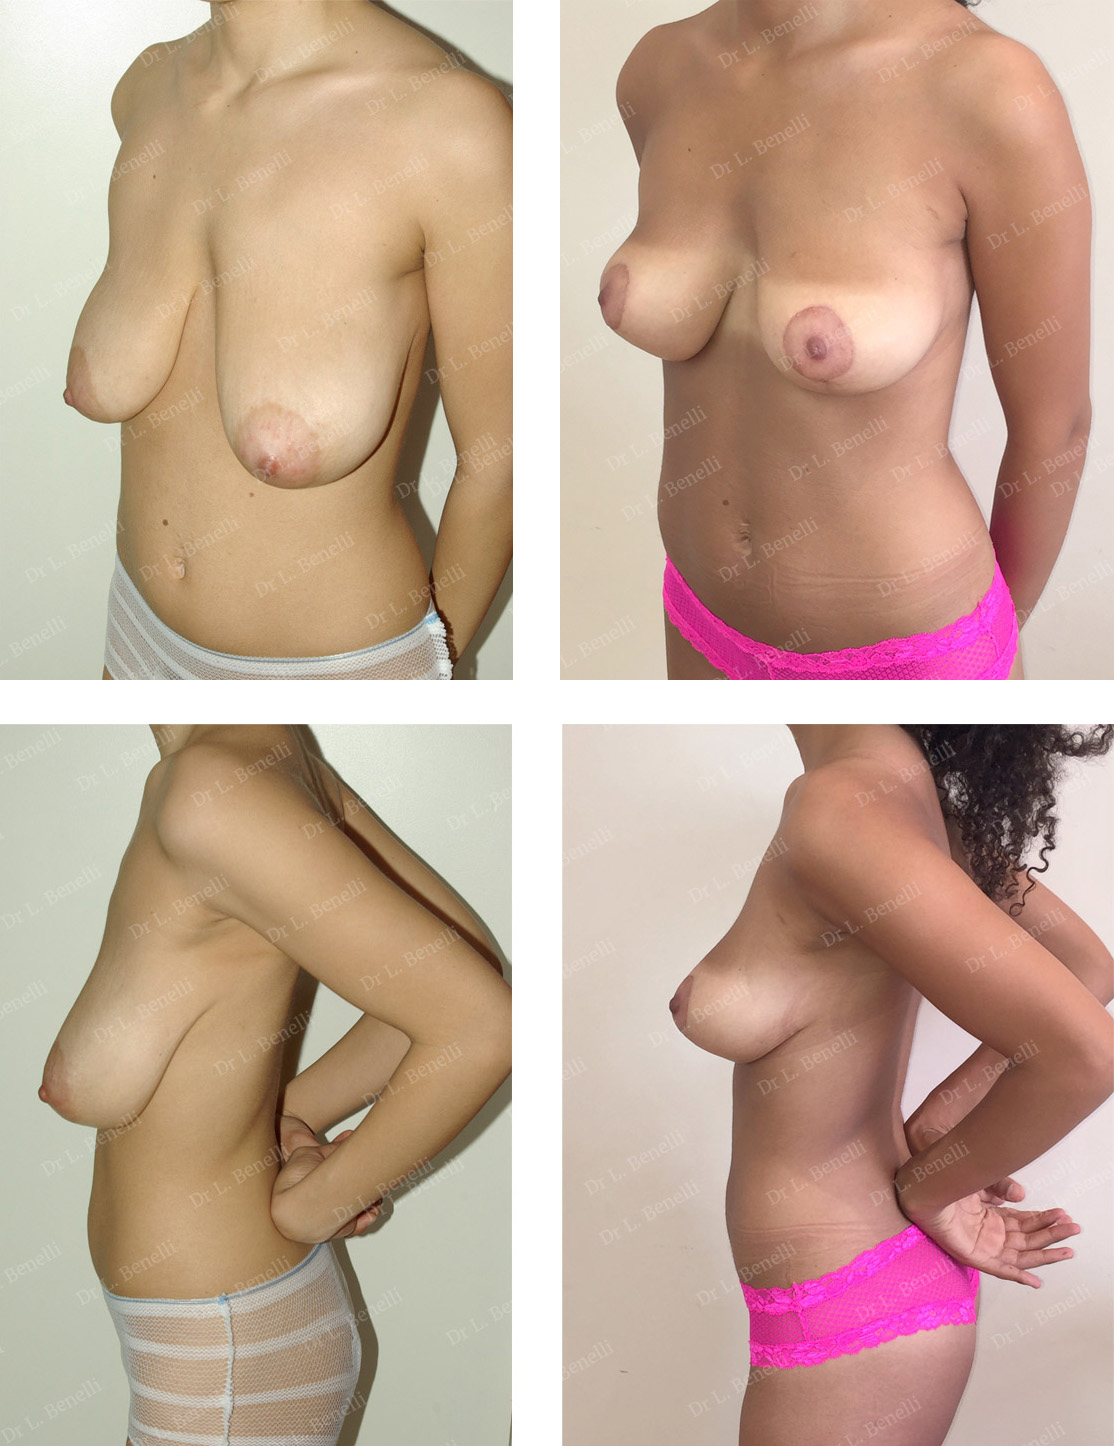 Breast lift performed by Dr. Benelli, plastic surgeon